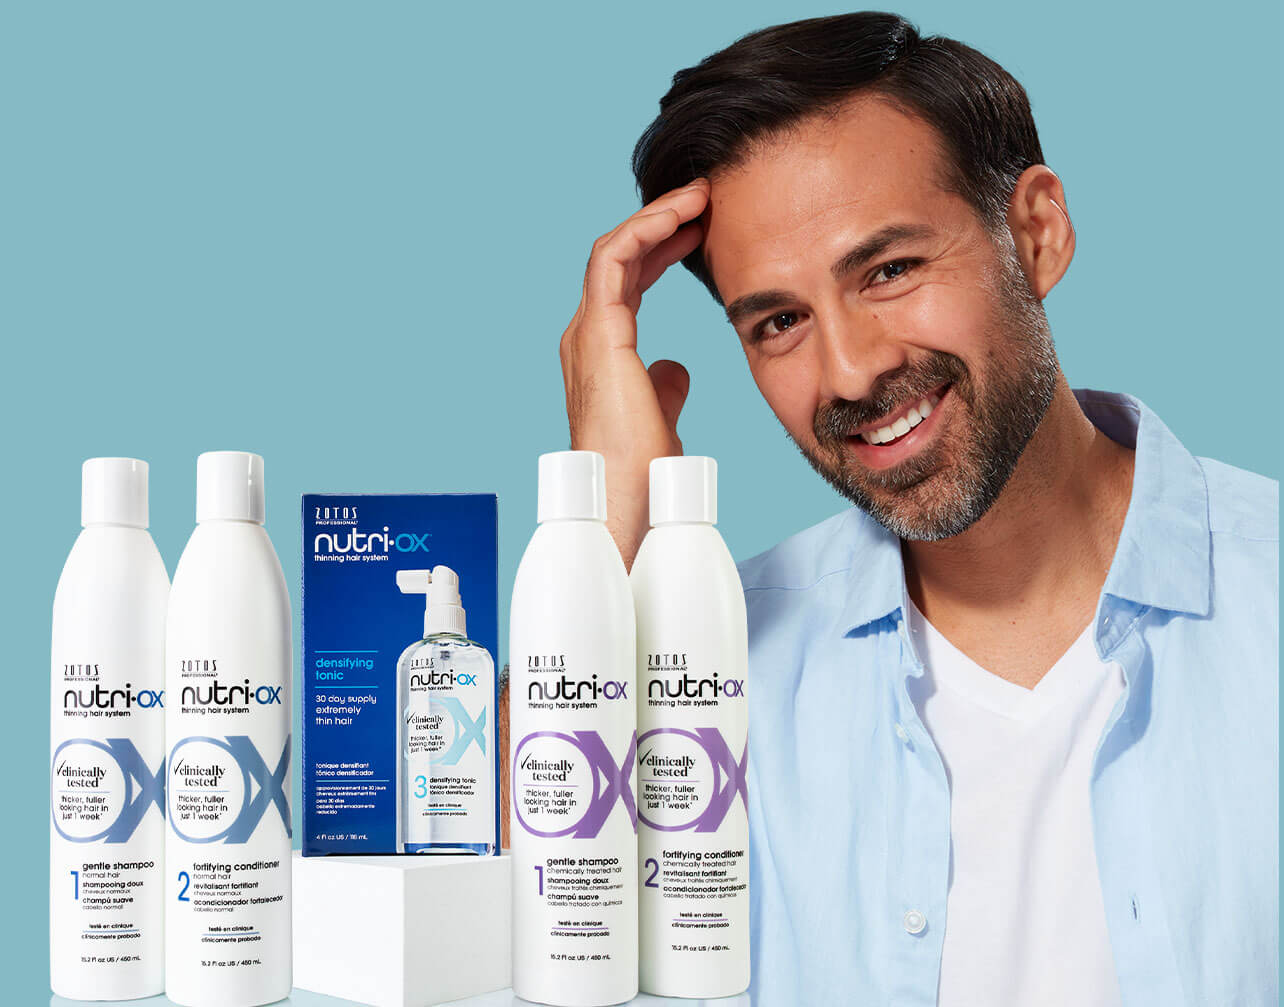 male model with hair product bottles on blue background